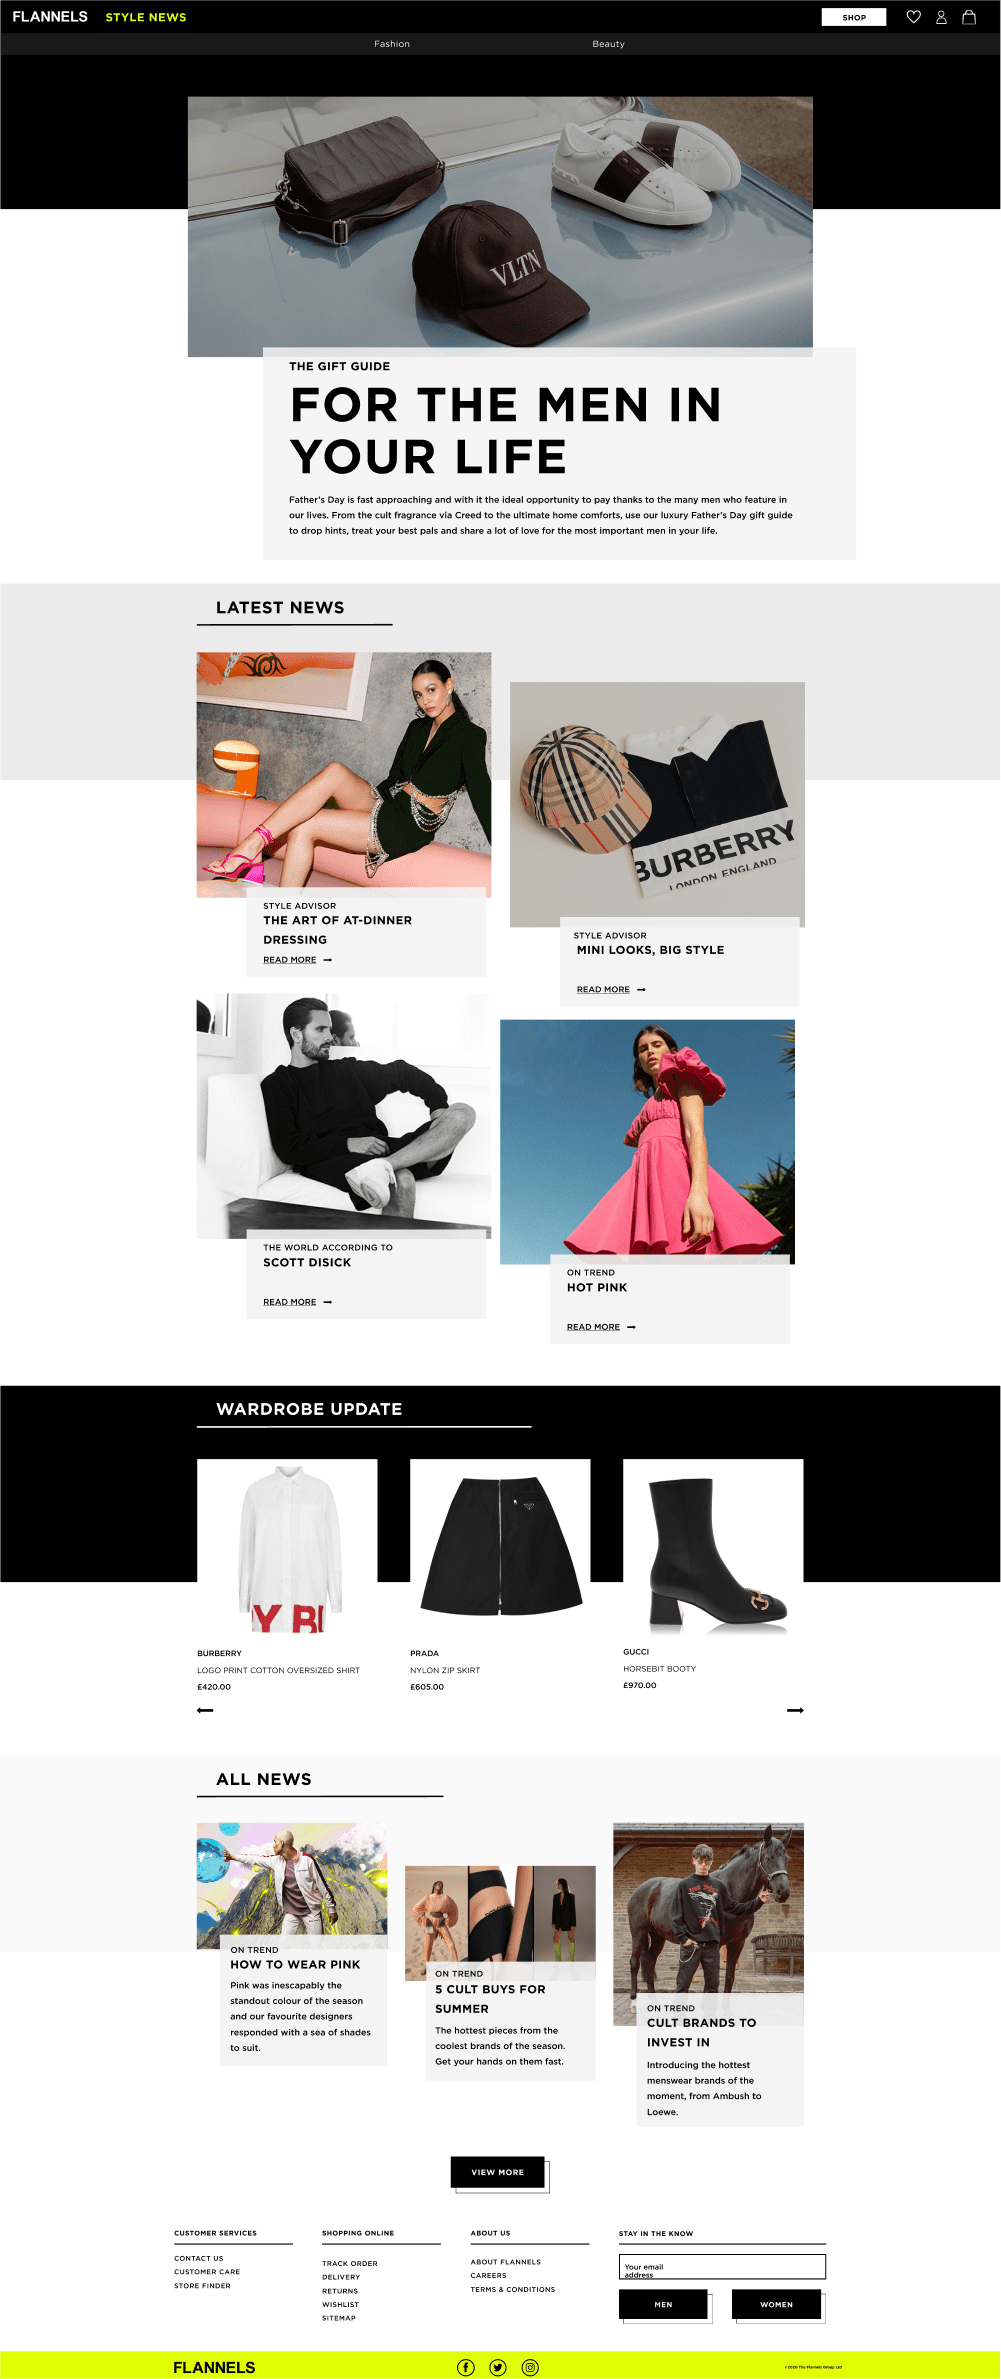 Design for a luxury fashion and beauty brand page